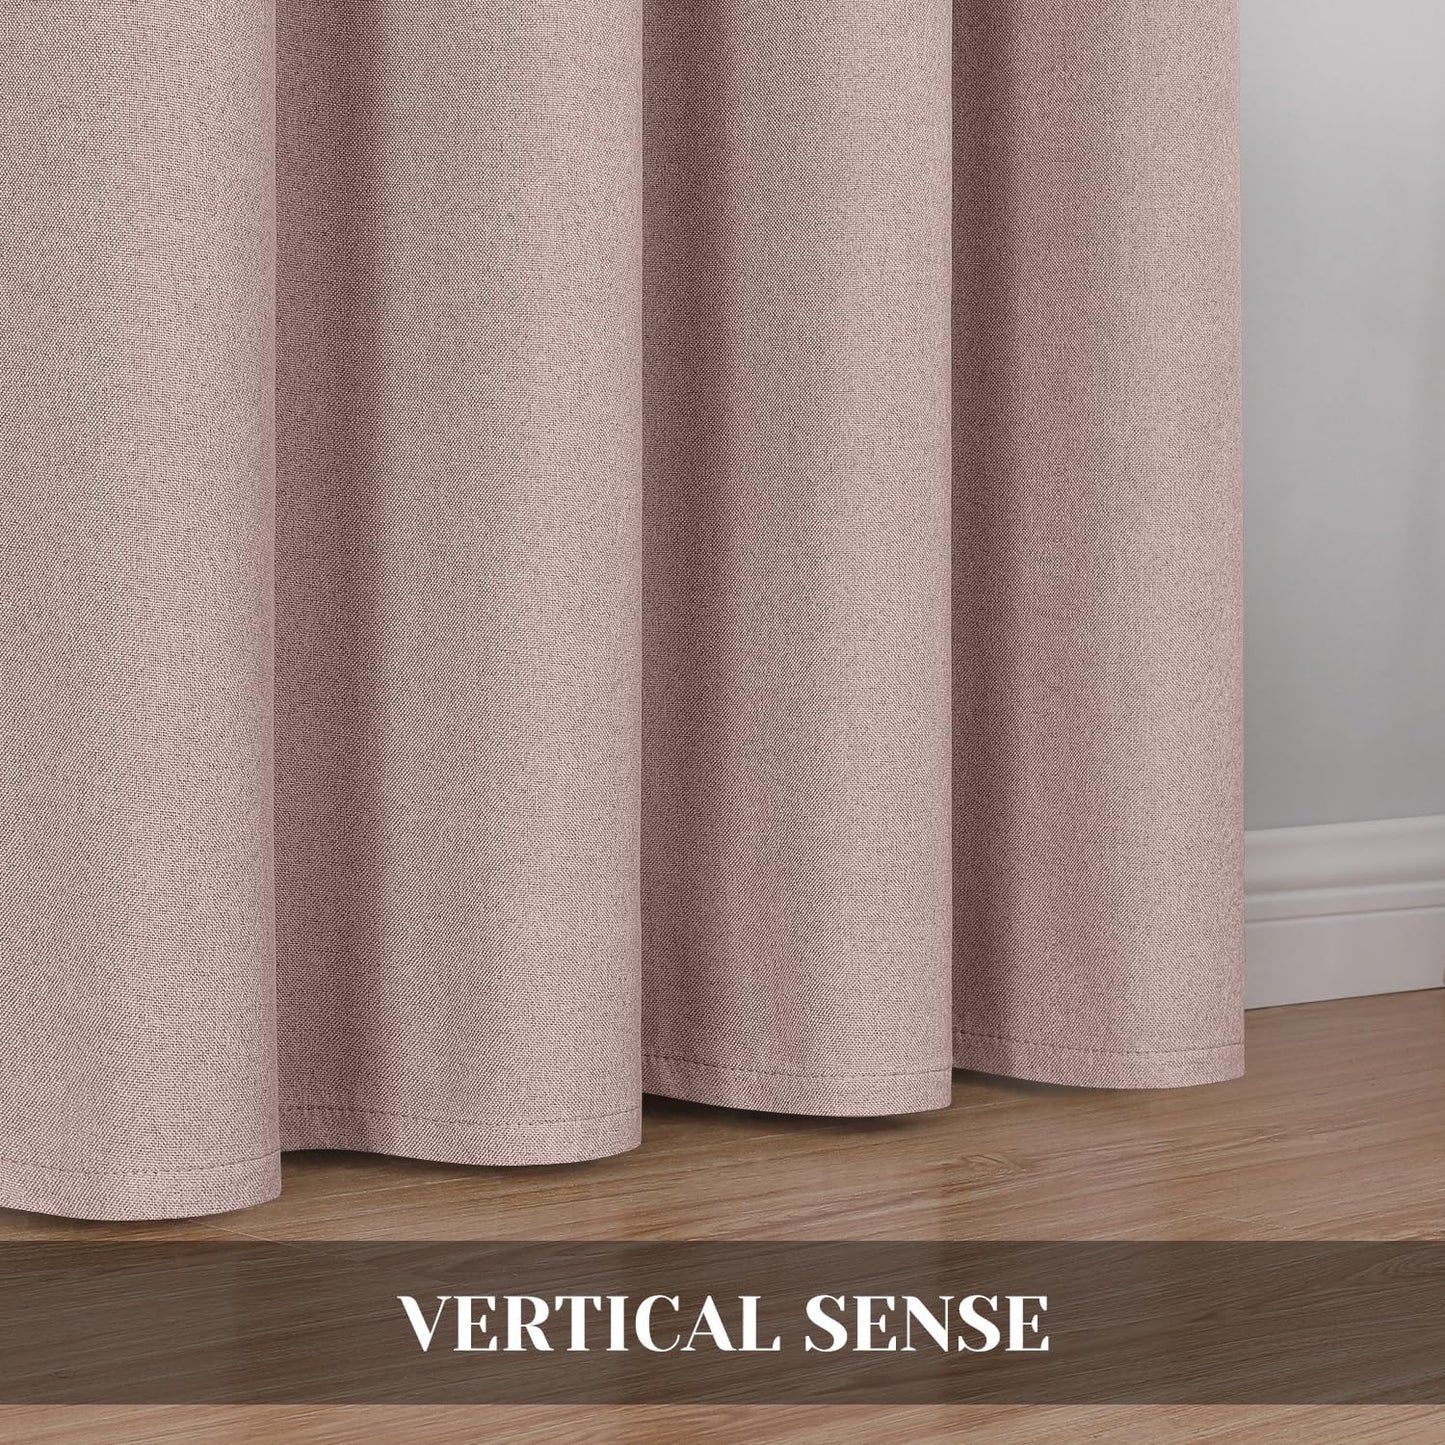 HOMEIDEAS 100% Blush Pink Linen Blackout Curtains for Bedroom, 52 X 84 Inch Room Darkening Curtains for Living, Faux Linen Thermal Insulated Full Black Out Grommet Window Curtains/Drapes  HOMEIDEAS   